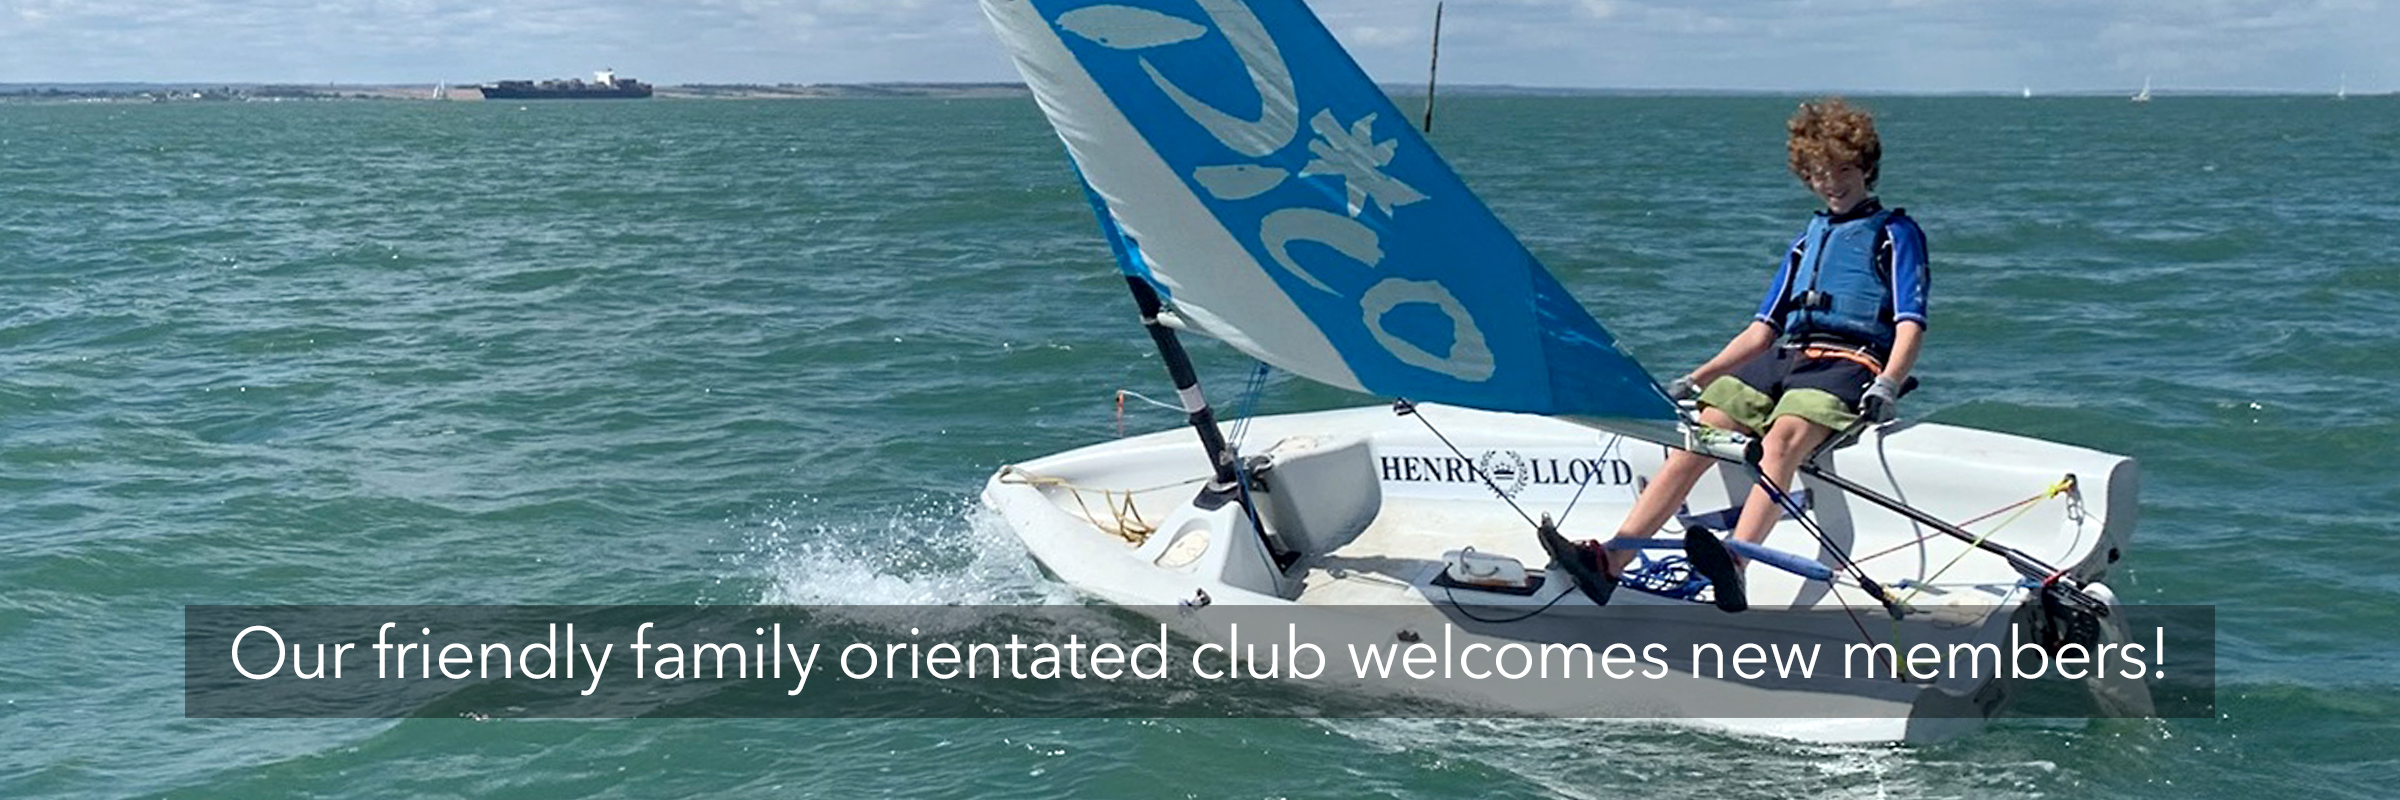 Permalink to:Our friendly family orientated club in Essex welcomes new members!